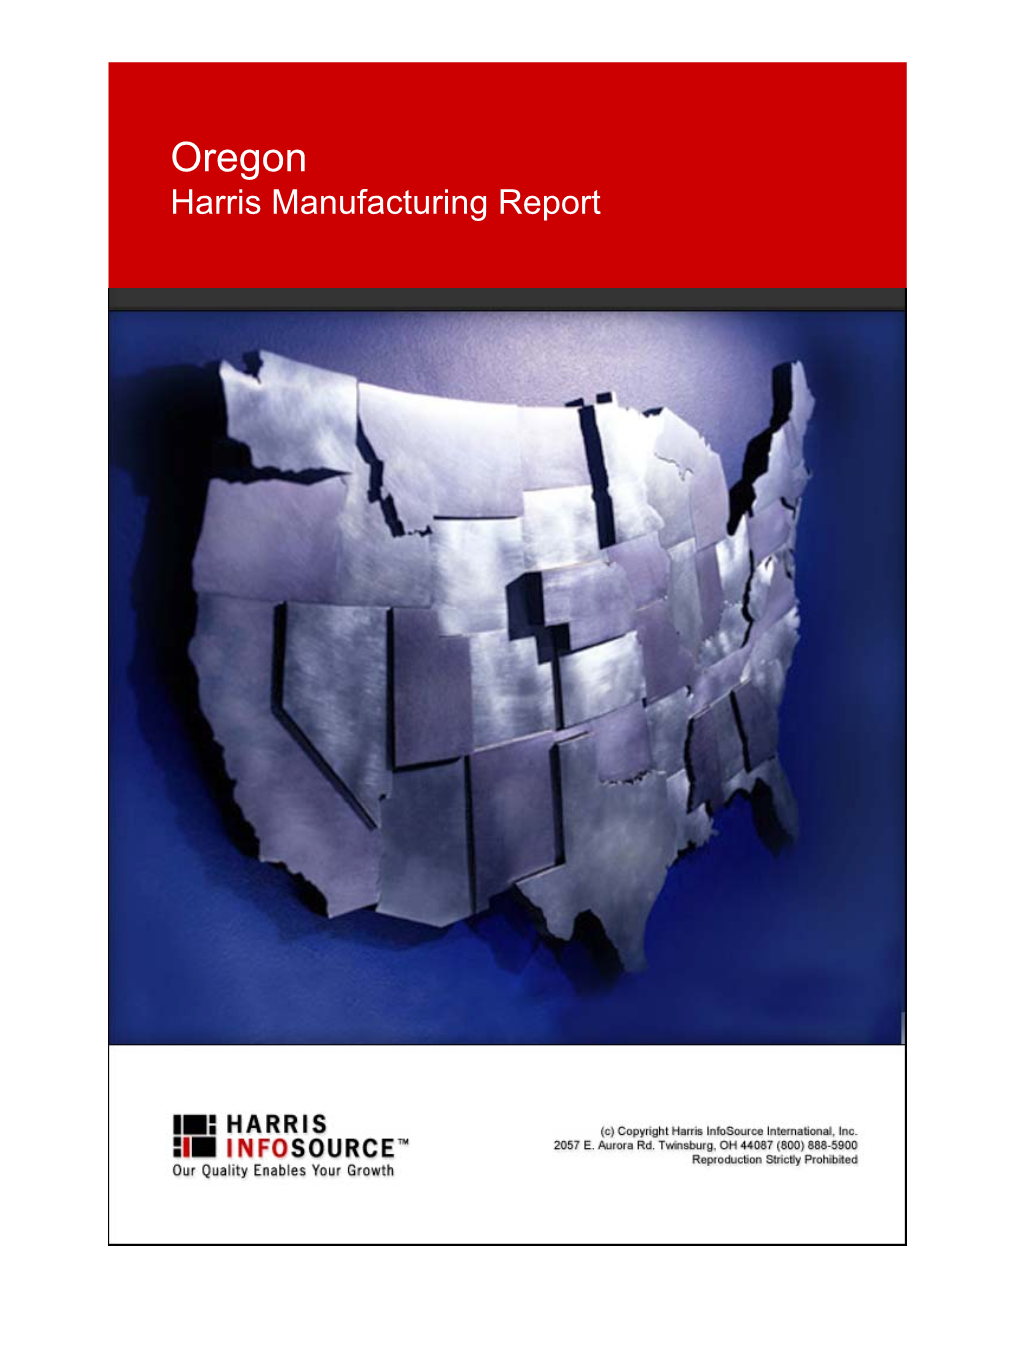 Oregon Harris Manufacturing Report Table of Contents